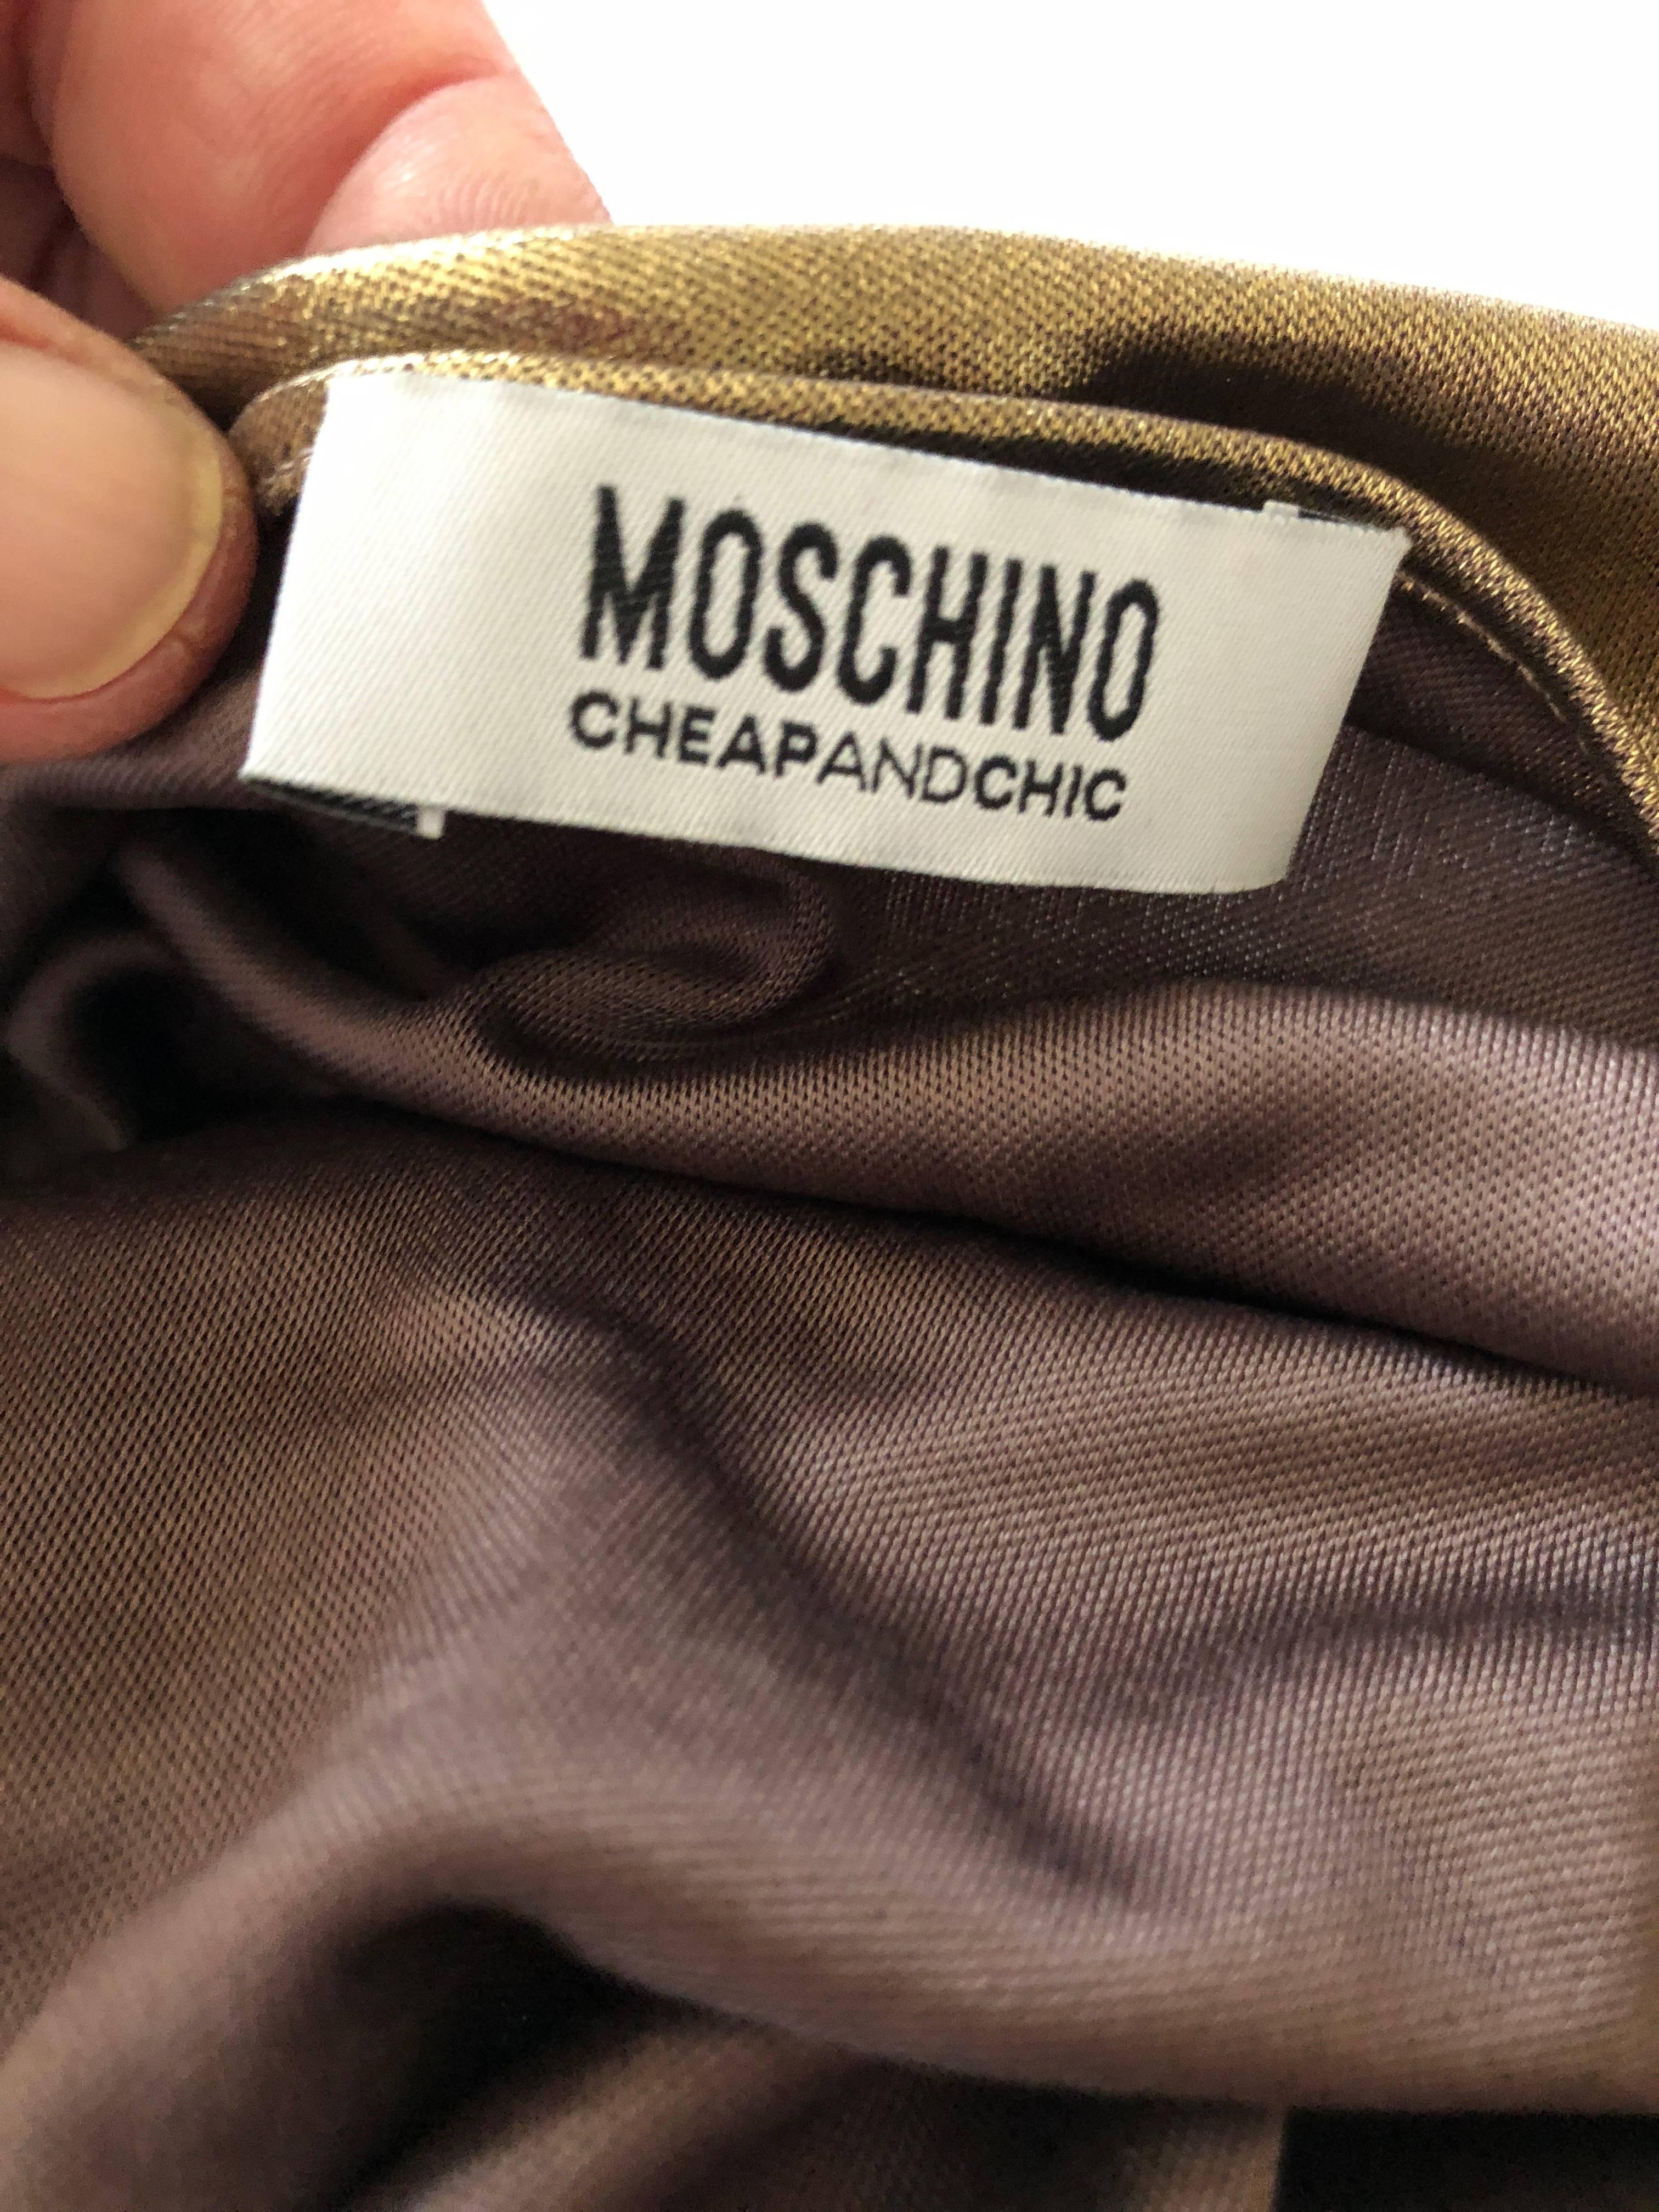 Moschino Vintage Liquid Gold Goddess Cocktail Dress For Sale 4